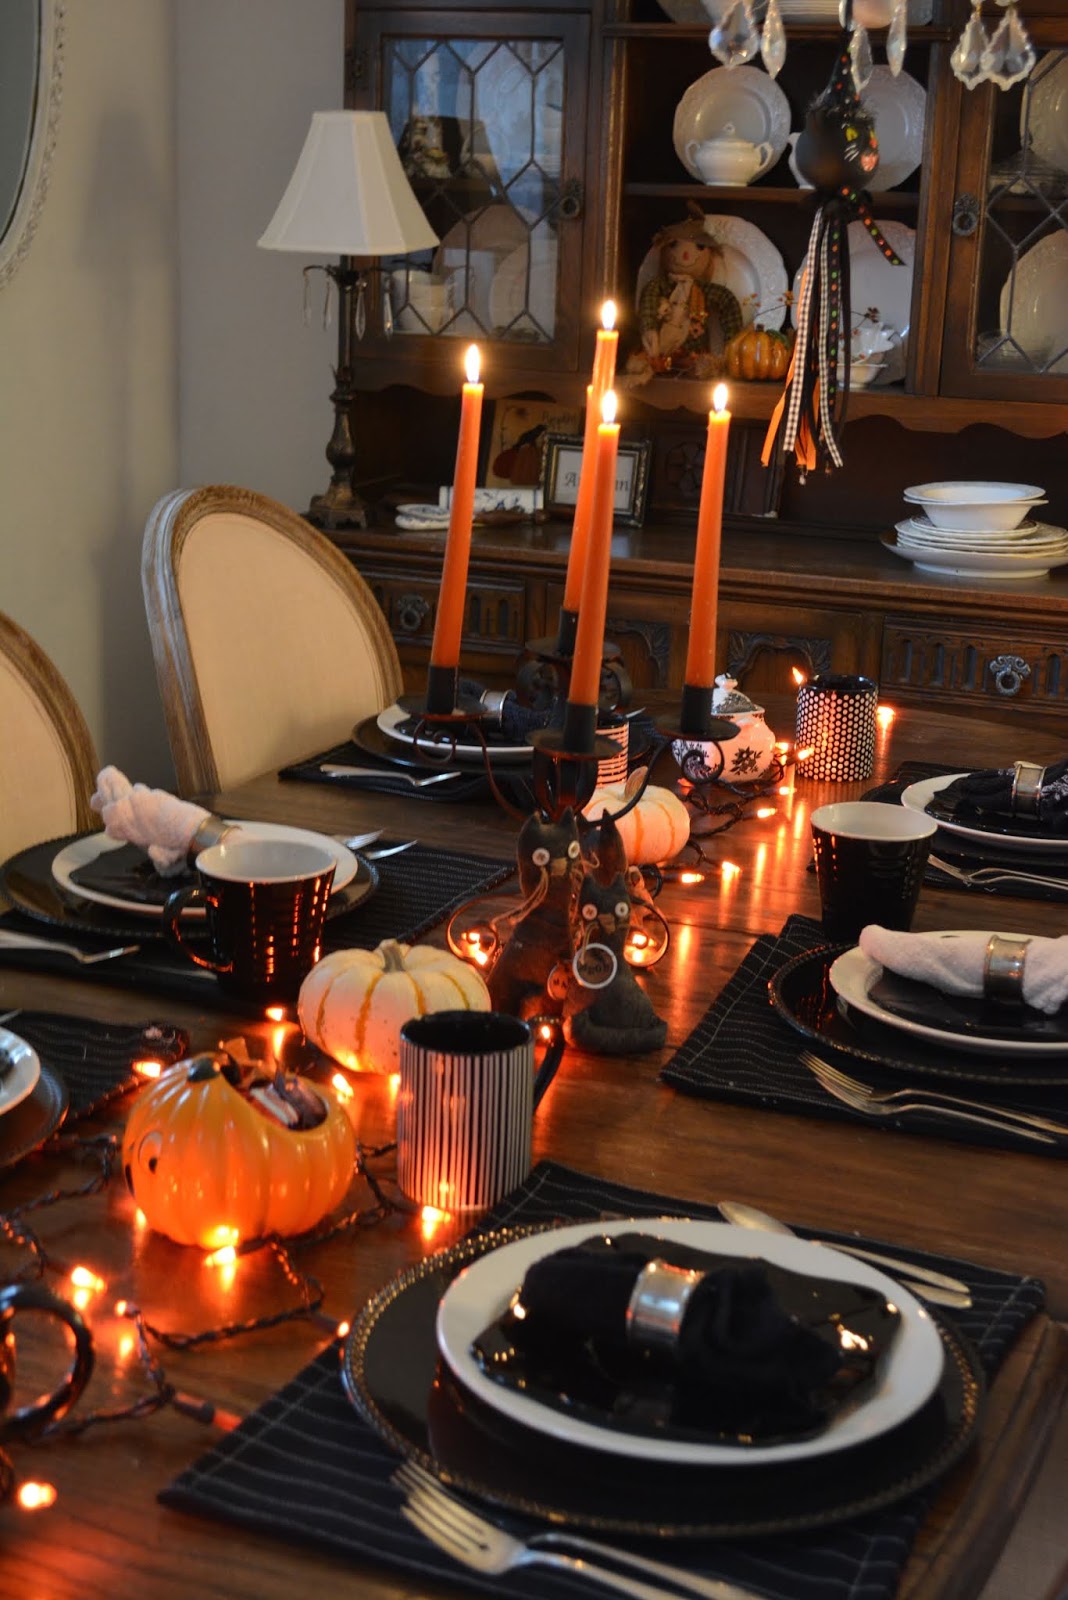 Let's Add Sprinkles: Halloween Tablescape